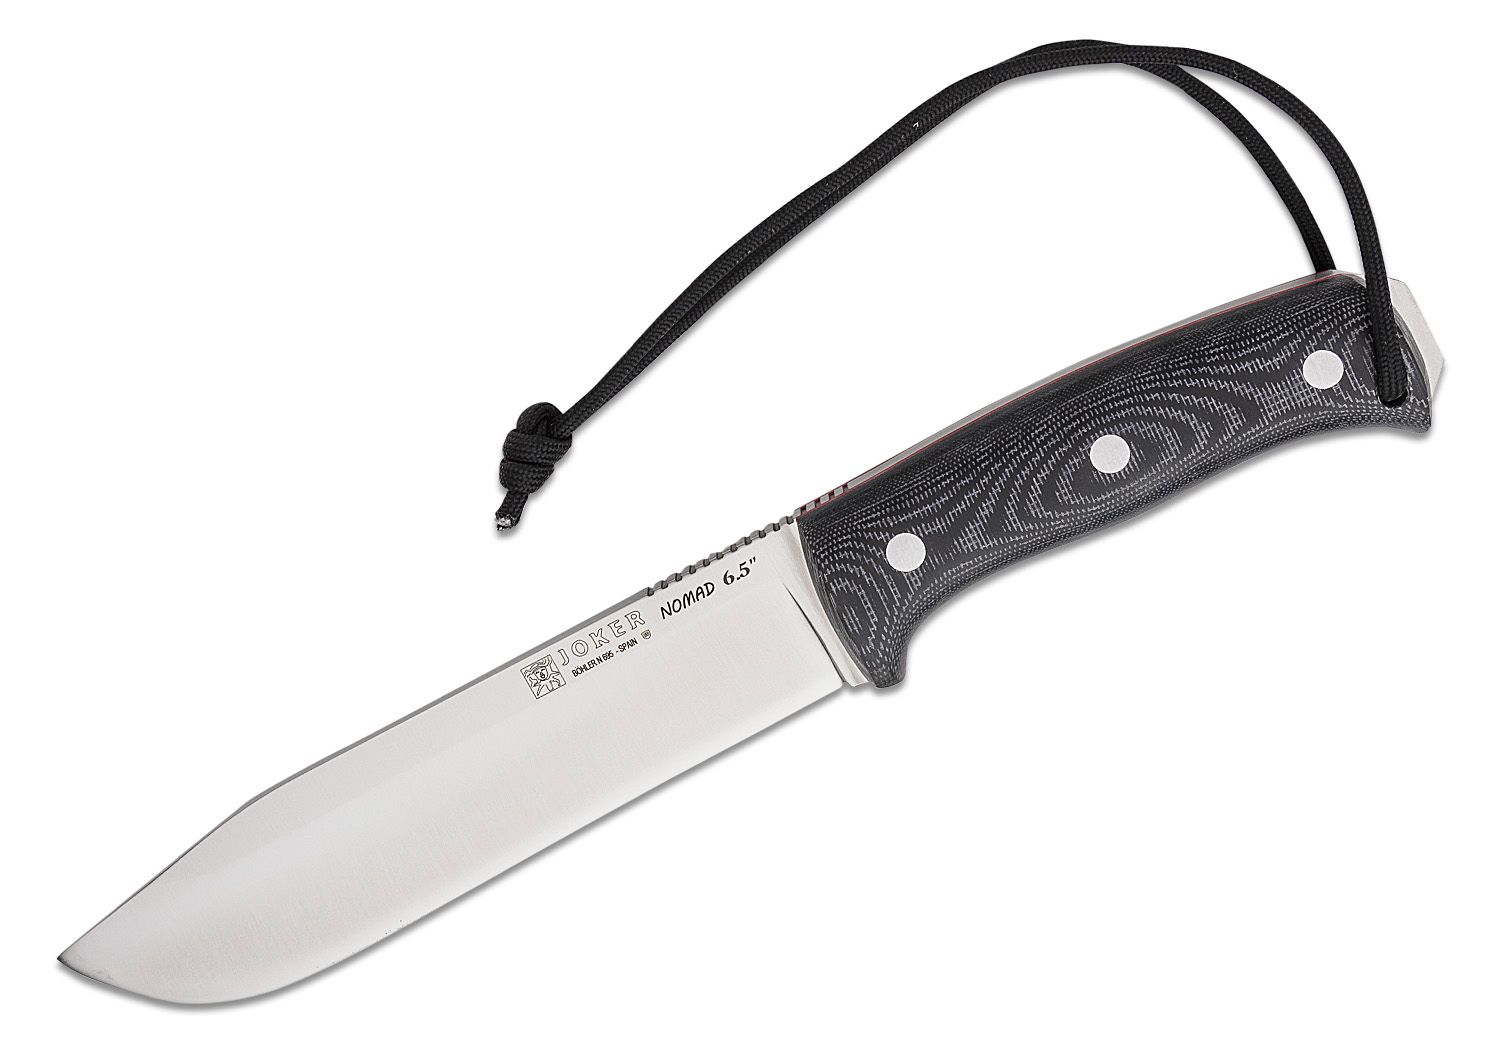 Optimal Pricing 8” Chef Knife by Nomad, single kitchen knife 